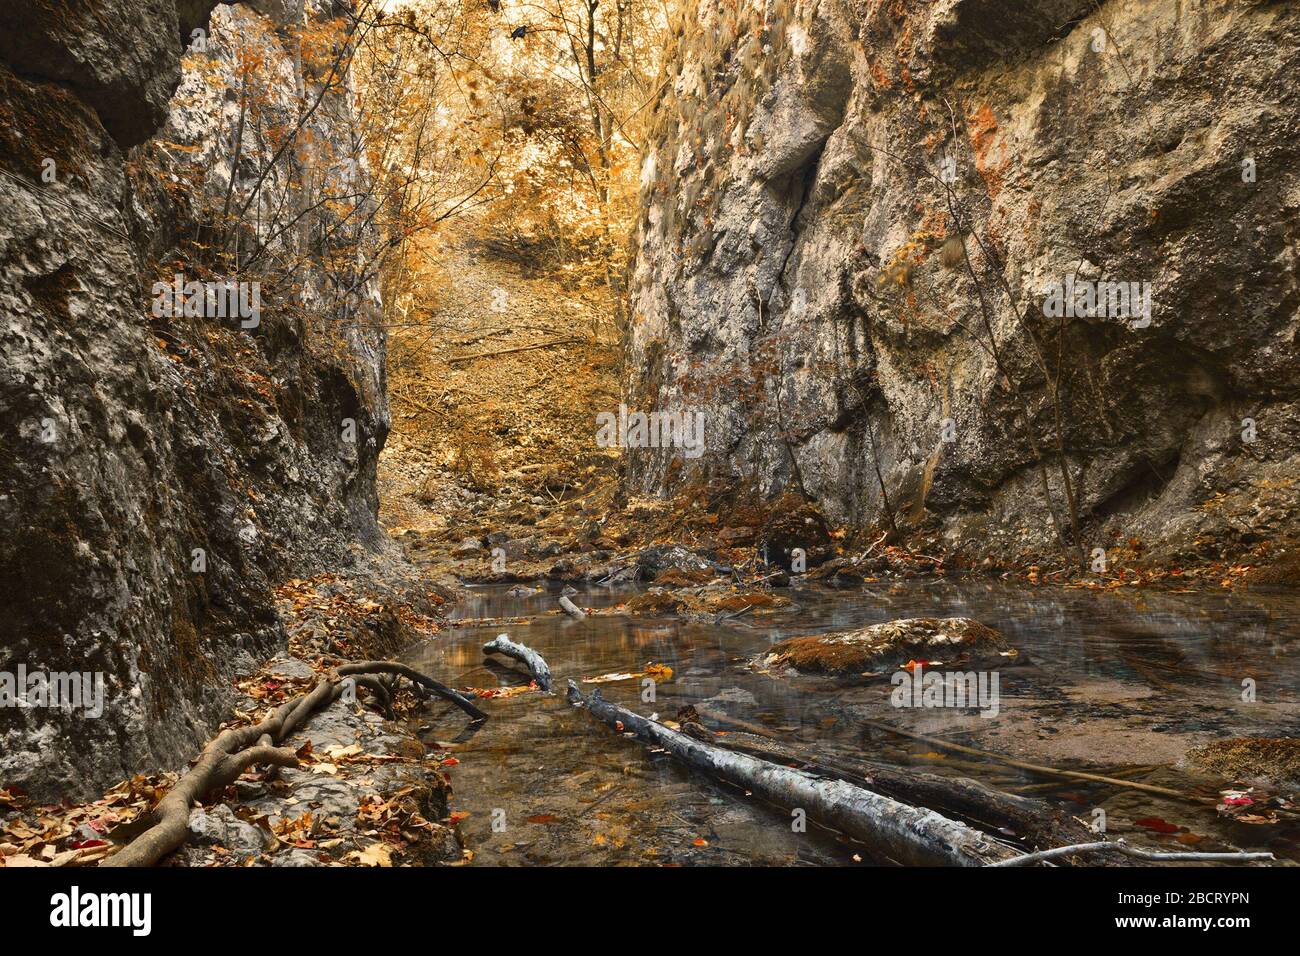 view of susara gorges in fall season, Caransebes, Romania Stock Photo